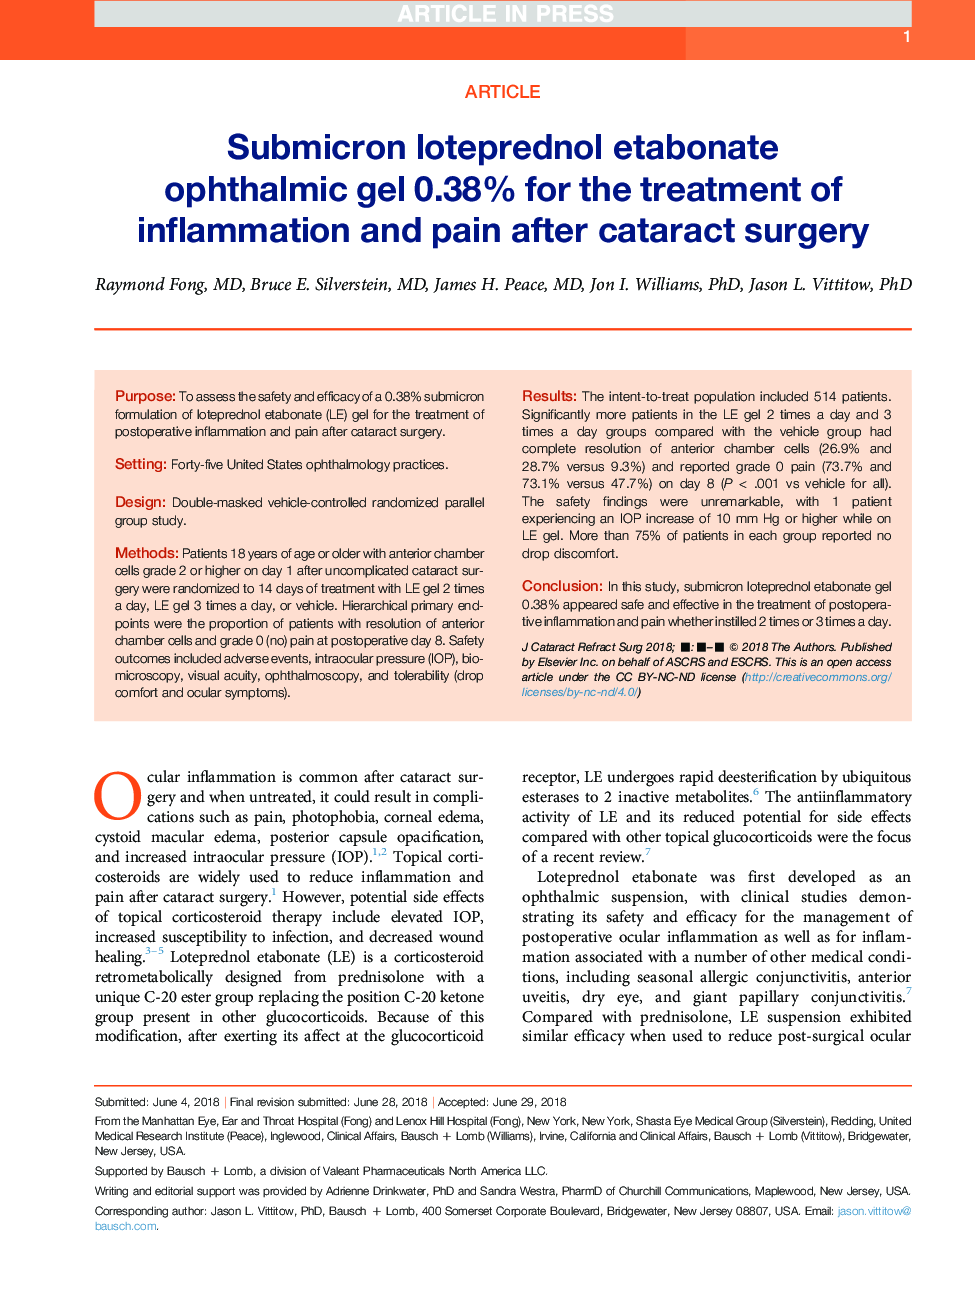 Submicron loteprednol etabonate ophthalmic gel 0.38% for the treatment of inflammation and pain after cataract surgery